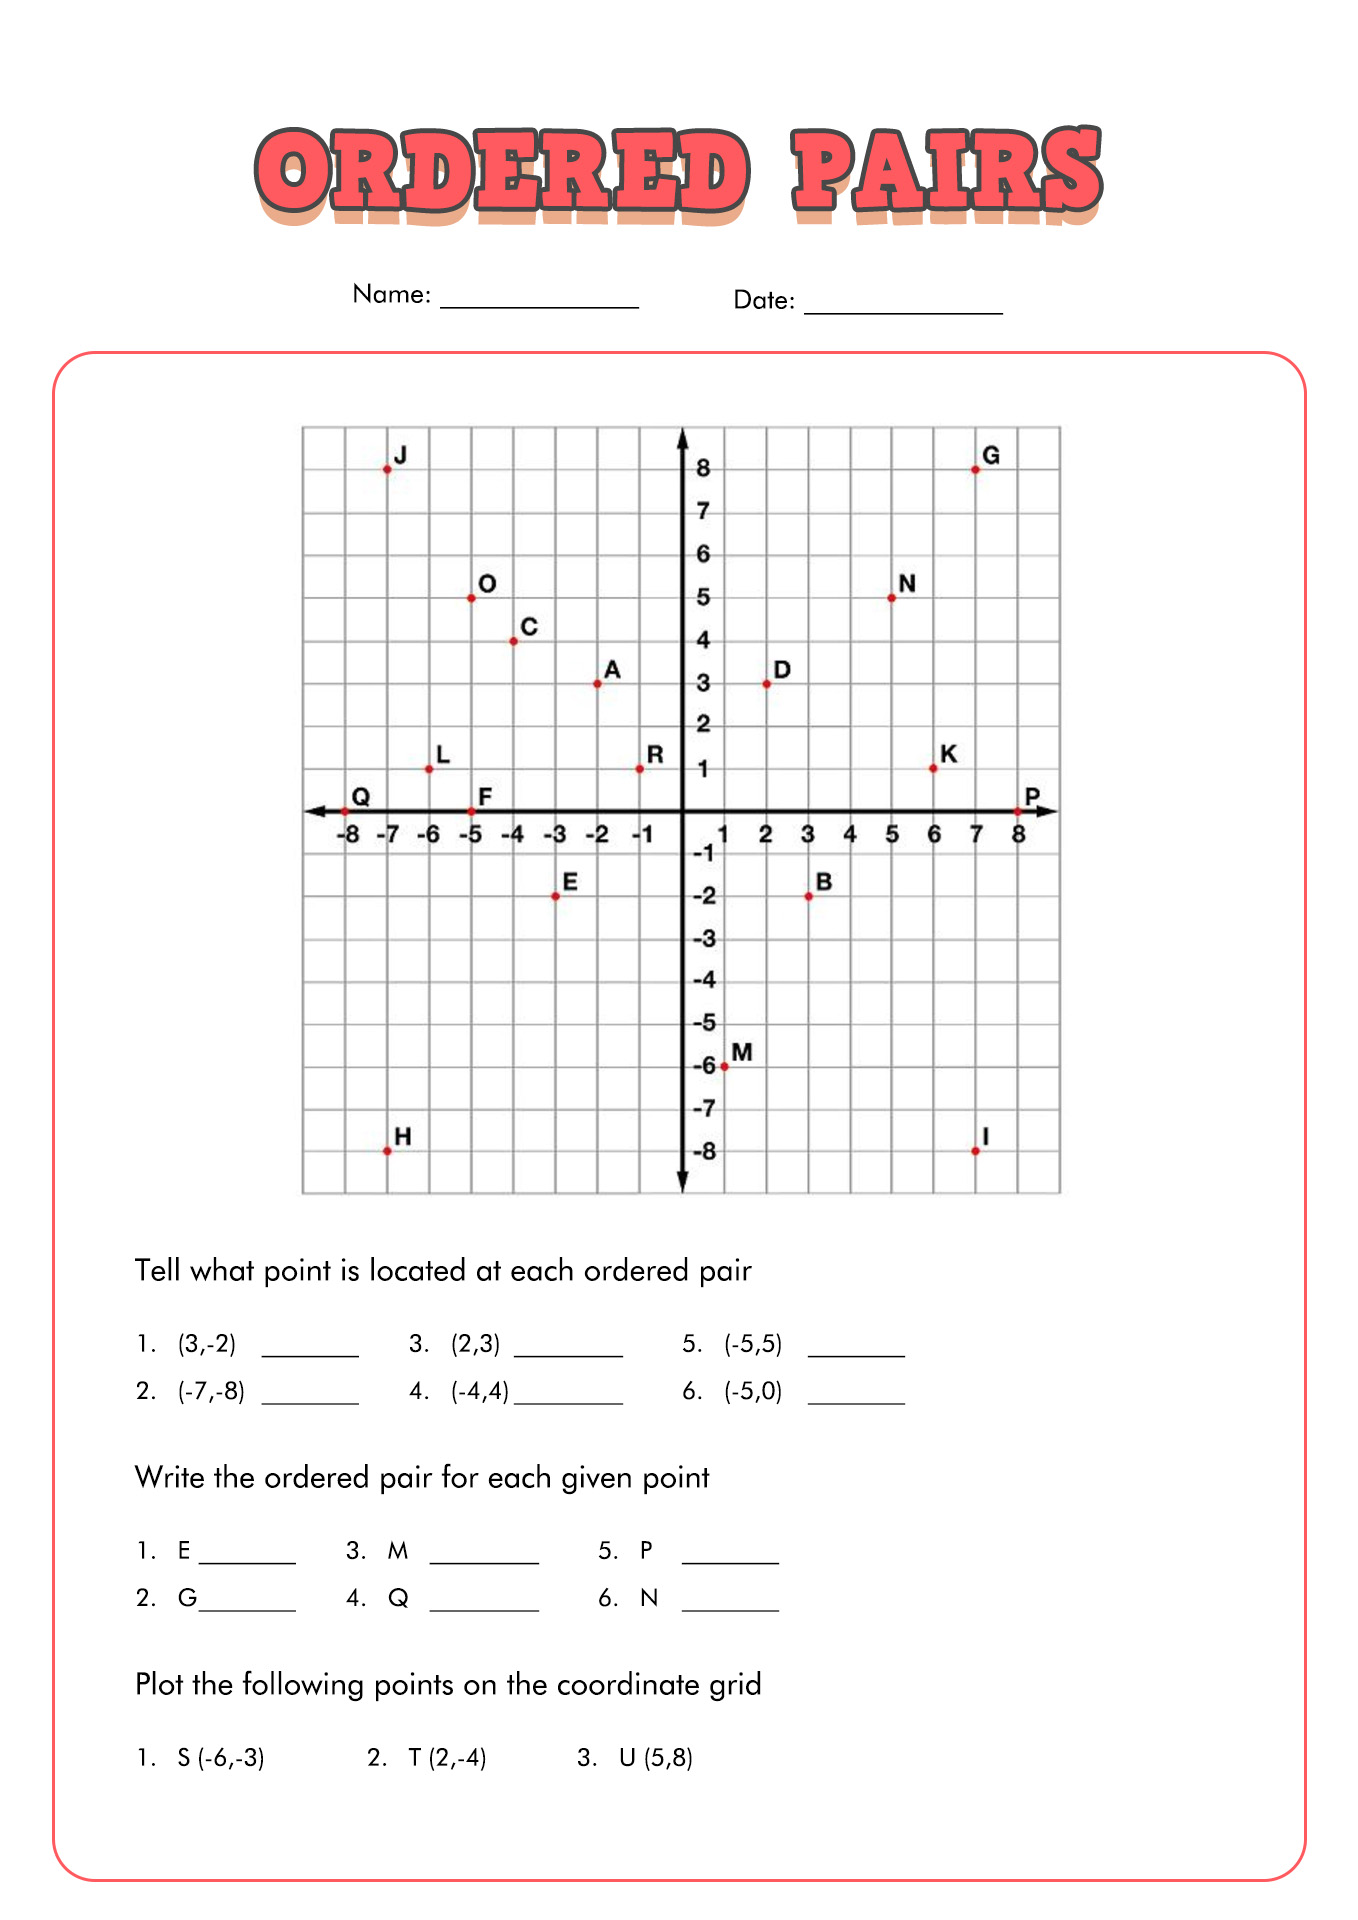 graphing inequalities on a coordinate plane